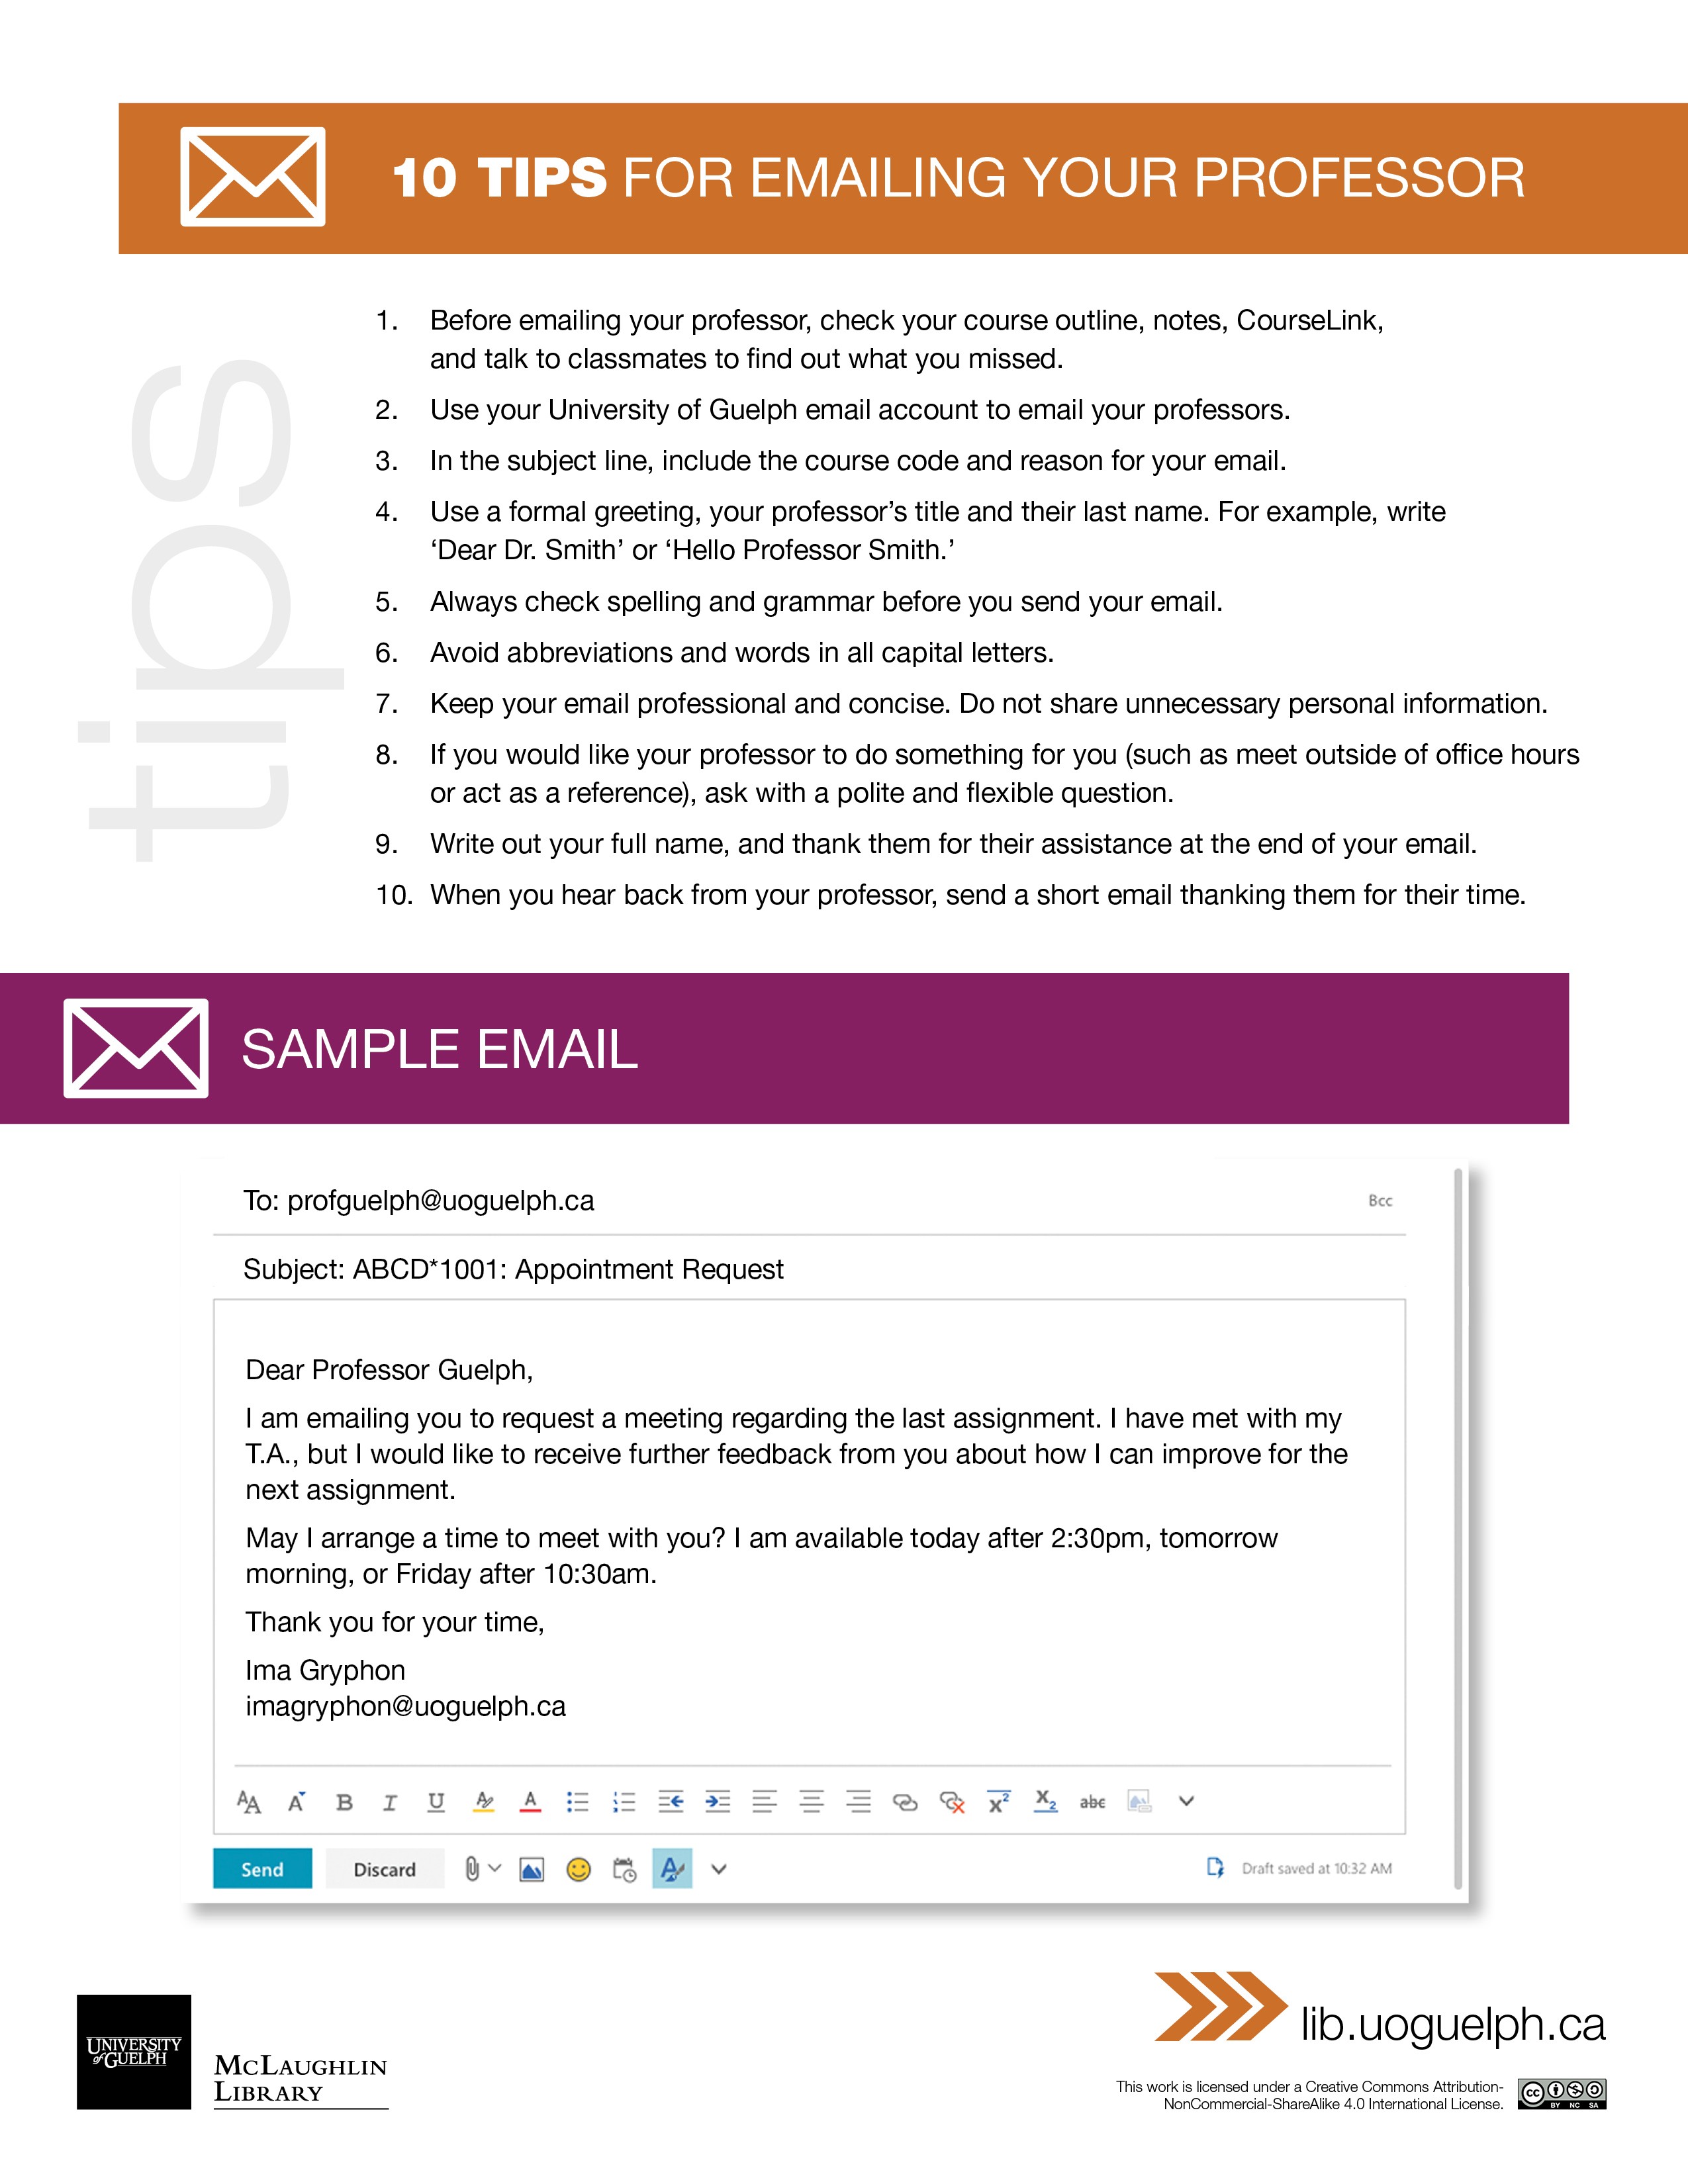 Handout: 10 Tips for Emailing Your Professor